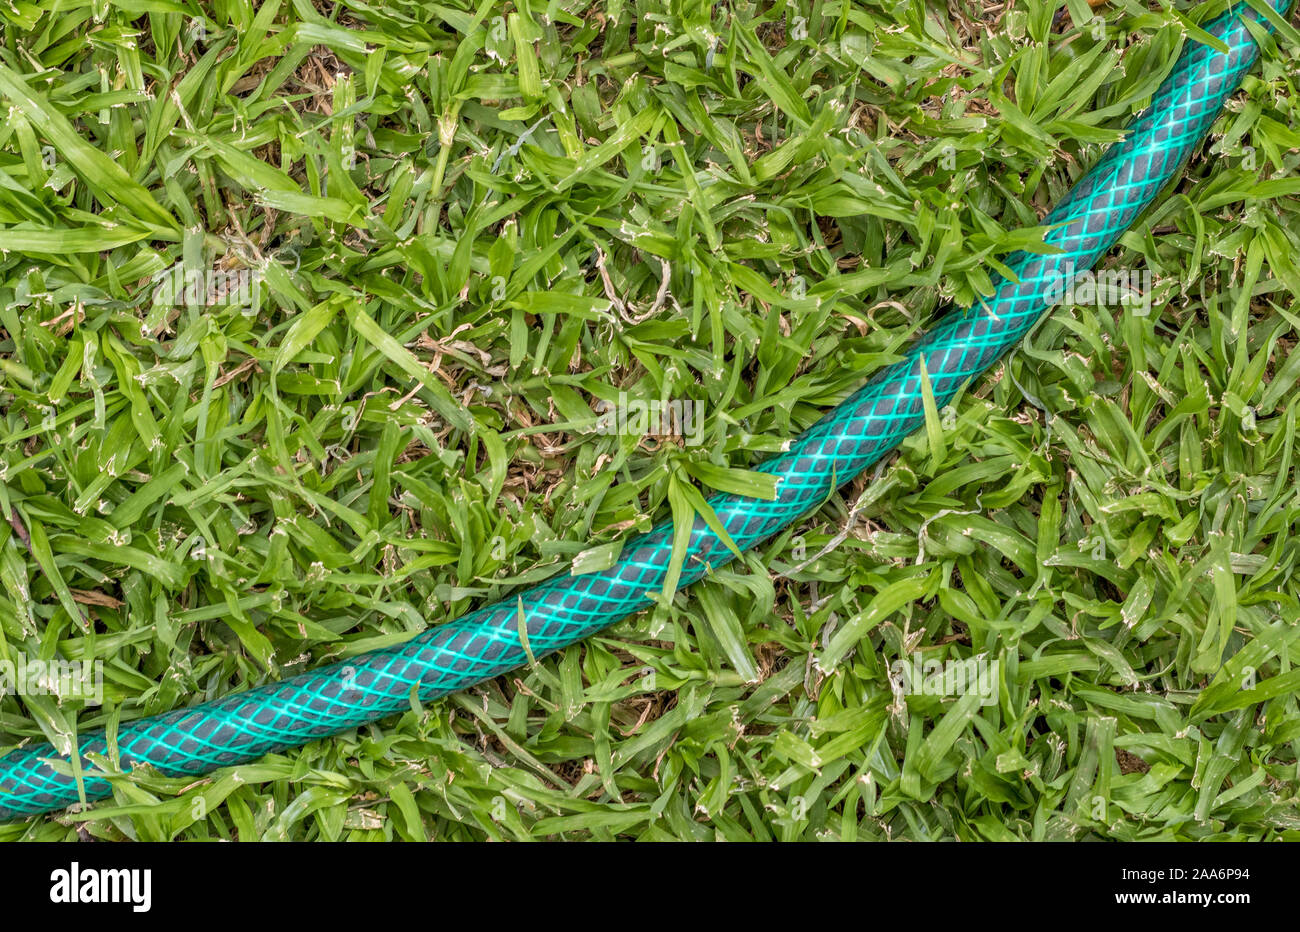 A green hosepipe at an angle on a green lawn - one dominant colour - image for background use with copy space Stock Photo